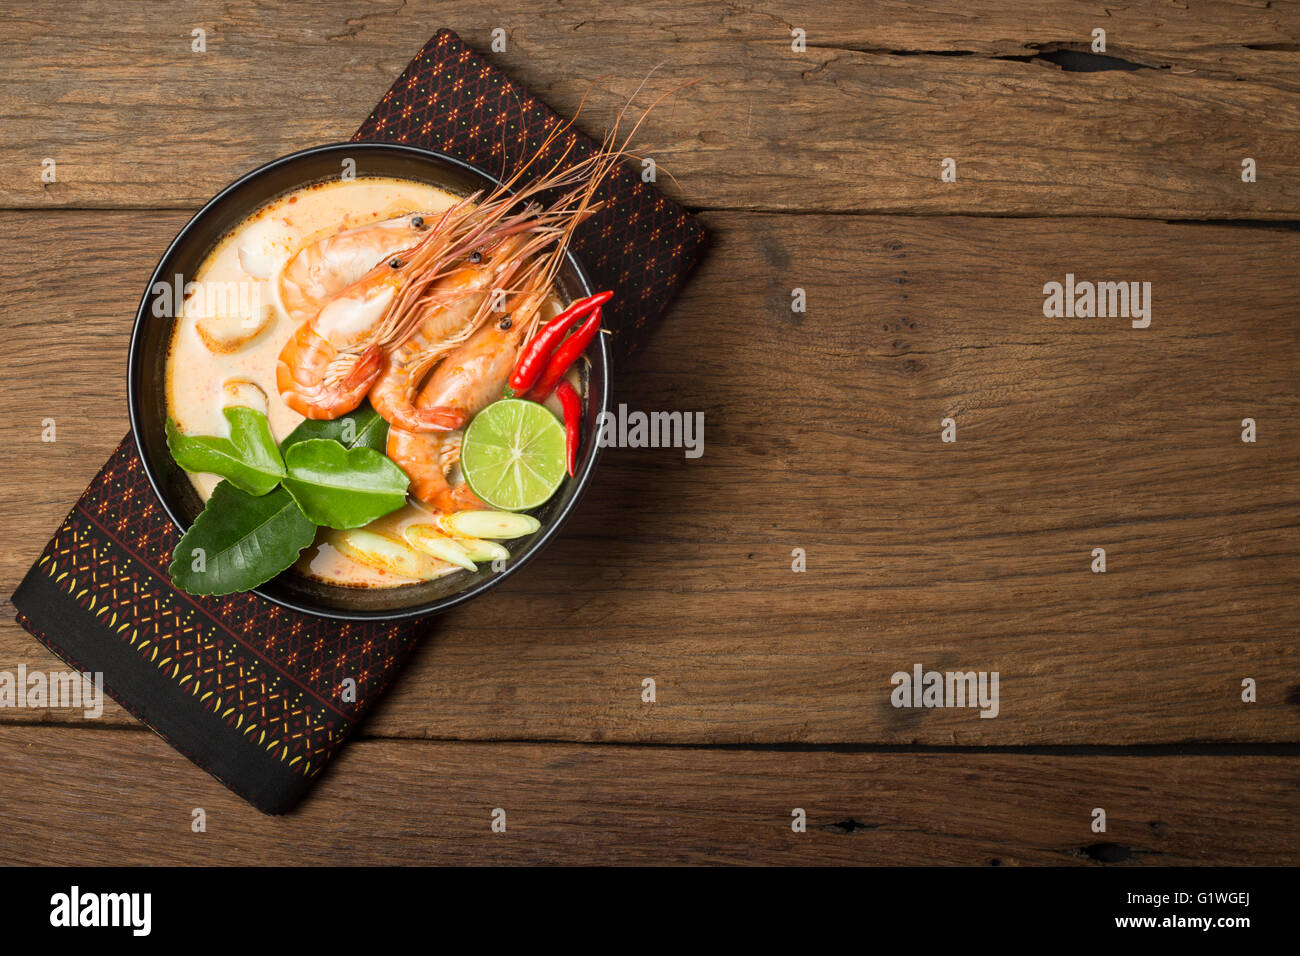 Tom Yum Goong traditional thai food cuisine in Thailand on wooden background Stock Photo